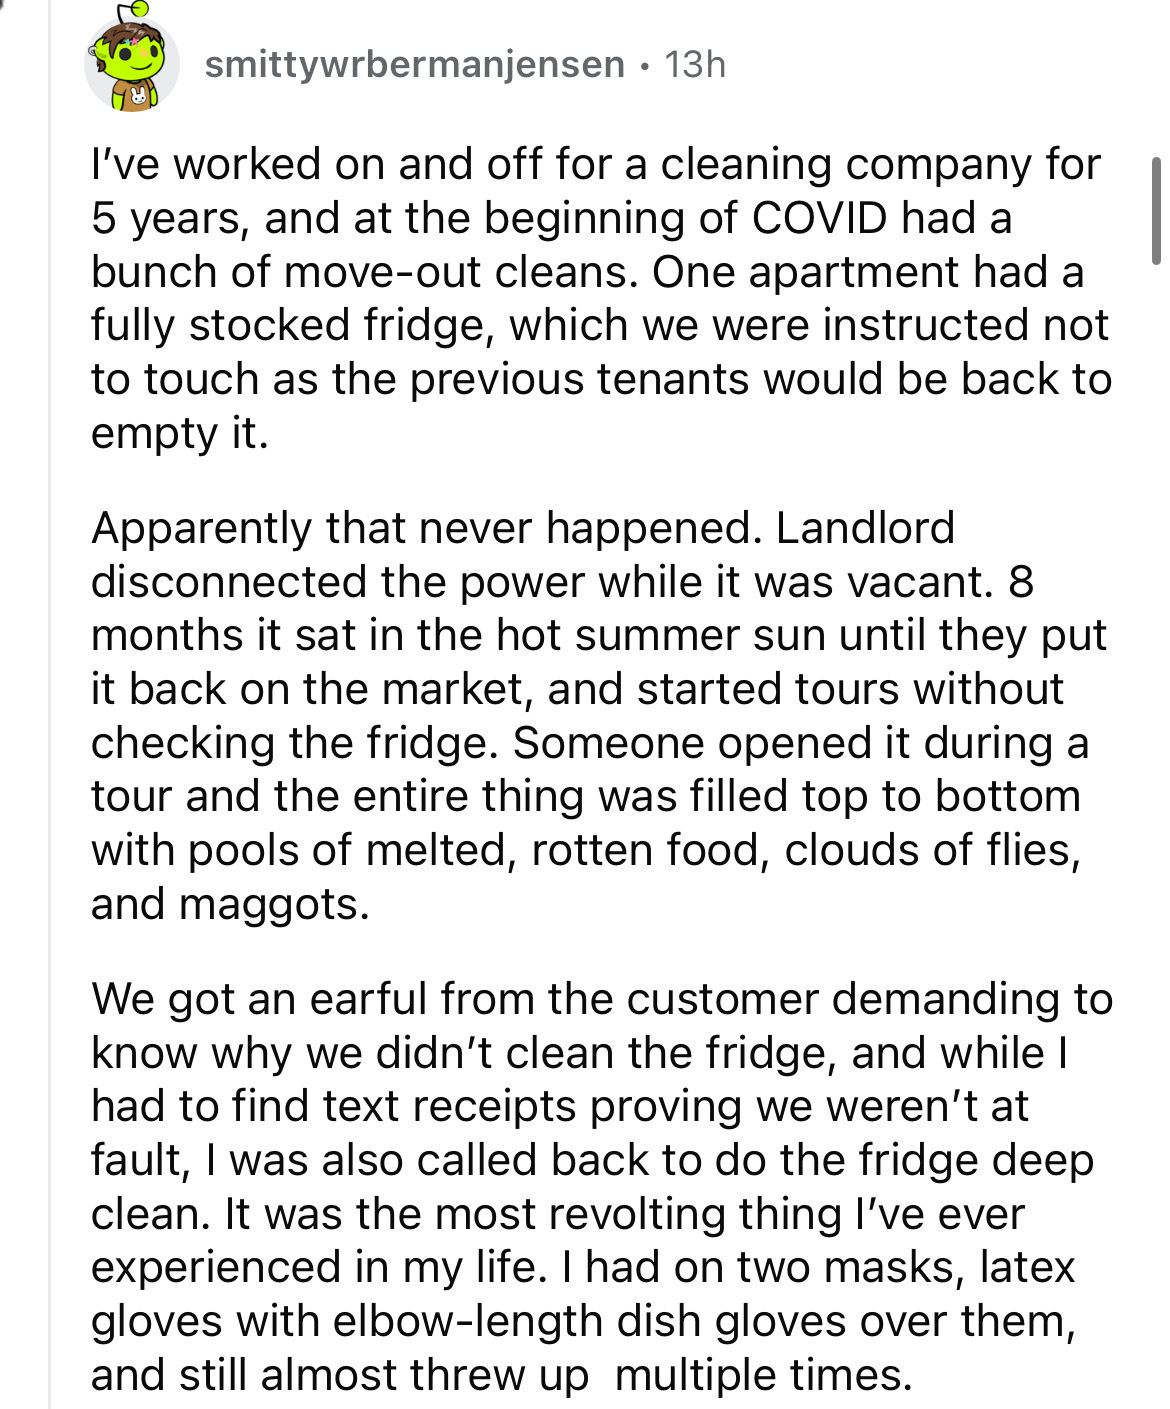 document - smittywrbermanjensen 13h I've worked on and off for a cleaning company for 5 years, and at the beginning of Covid had a bunch of moveout cleans. One apartment had a fully stocked fridge, which we were instructed not to touch as the previous ten